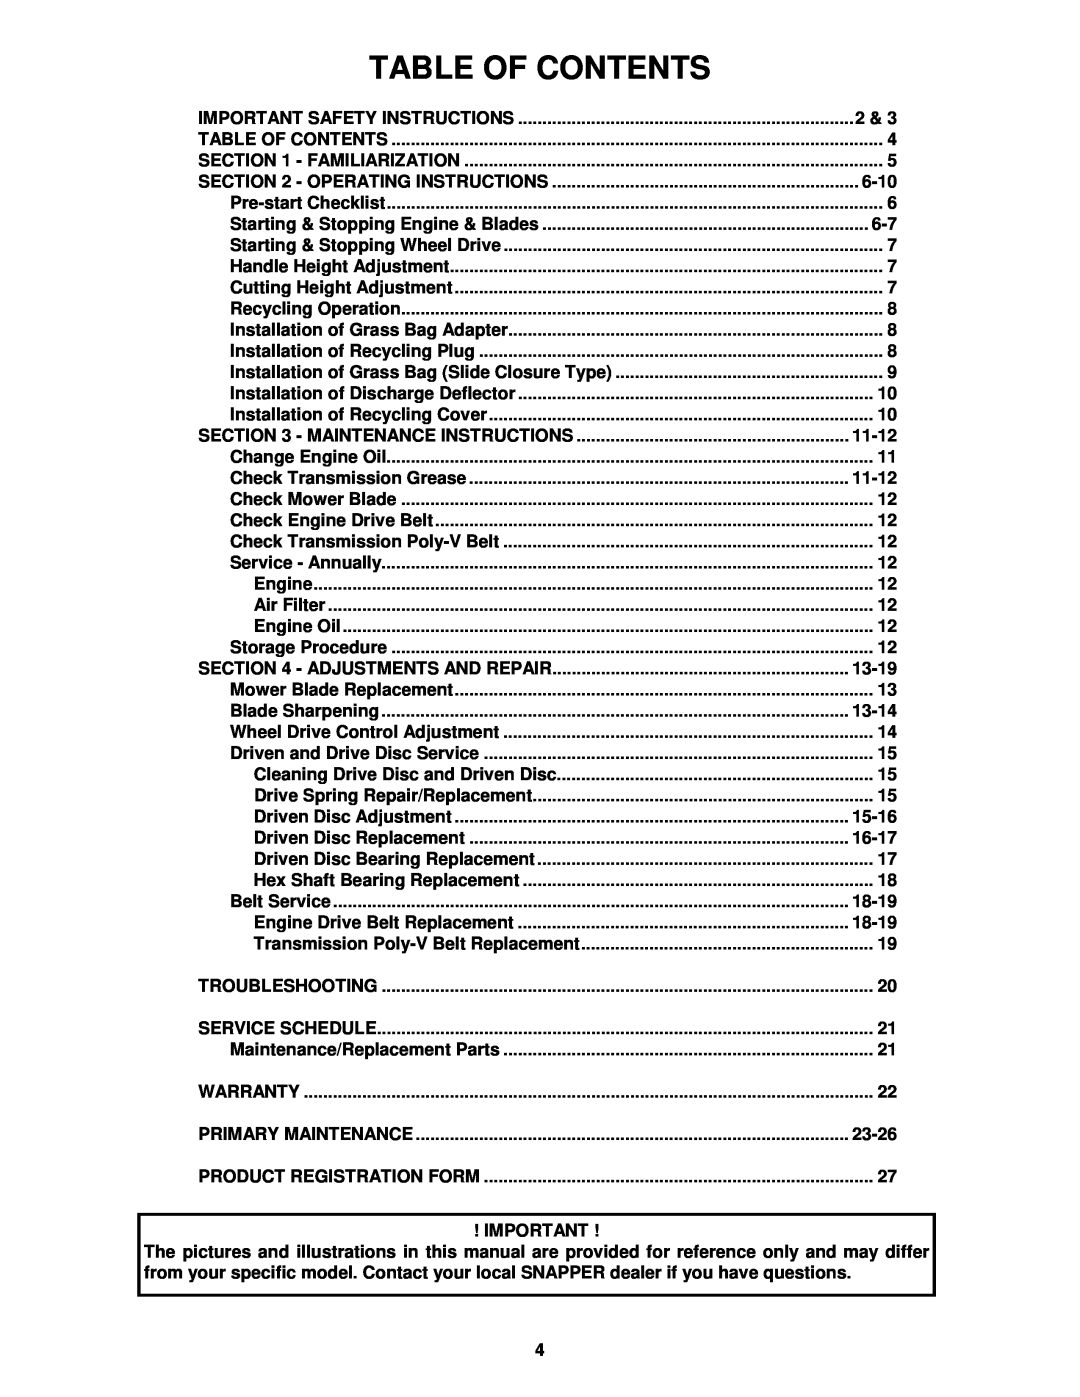 Snapper WMR216517B, WMRP216517B important safety instructions Table Of Contents 